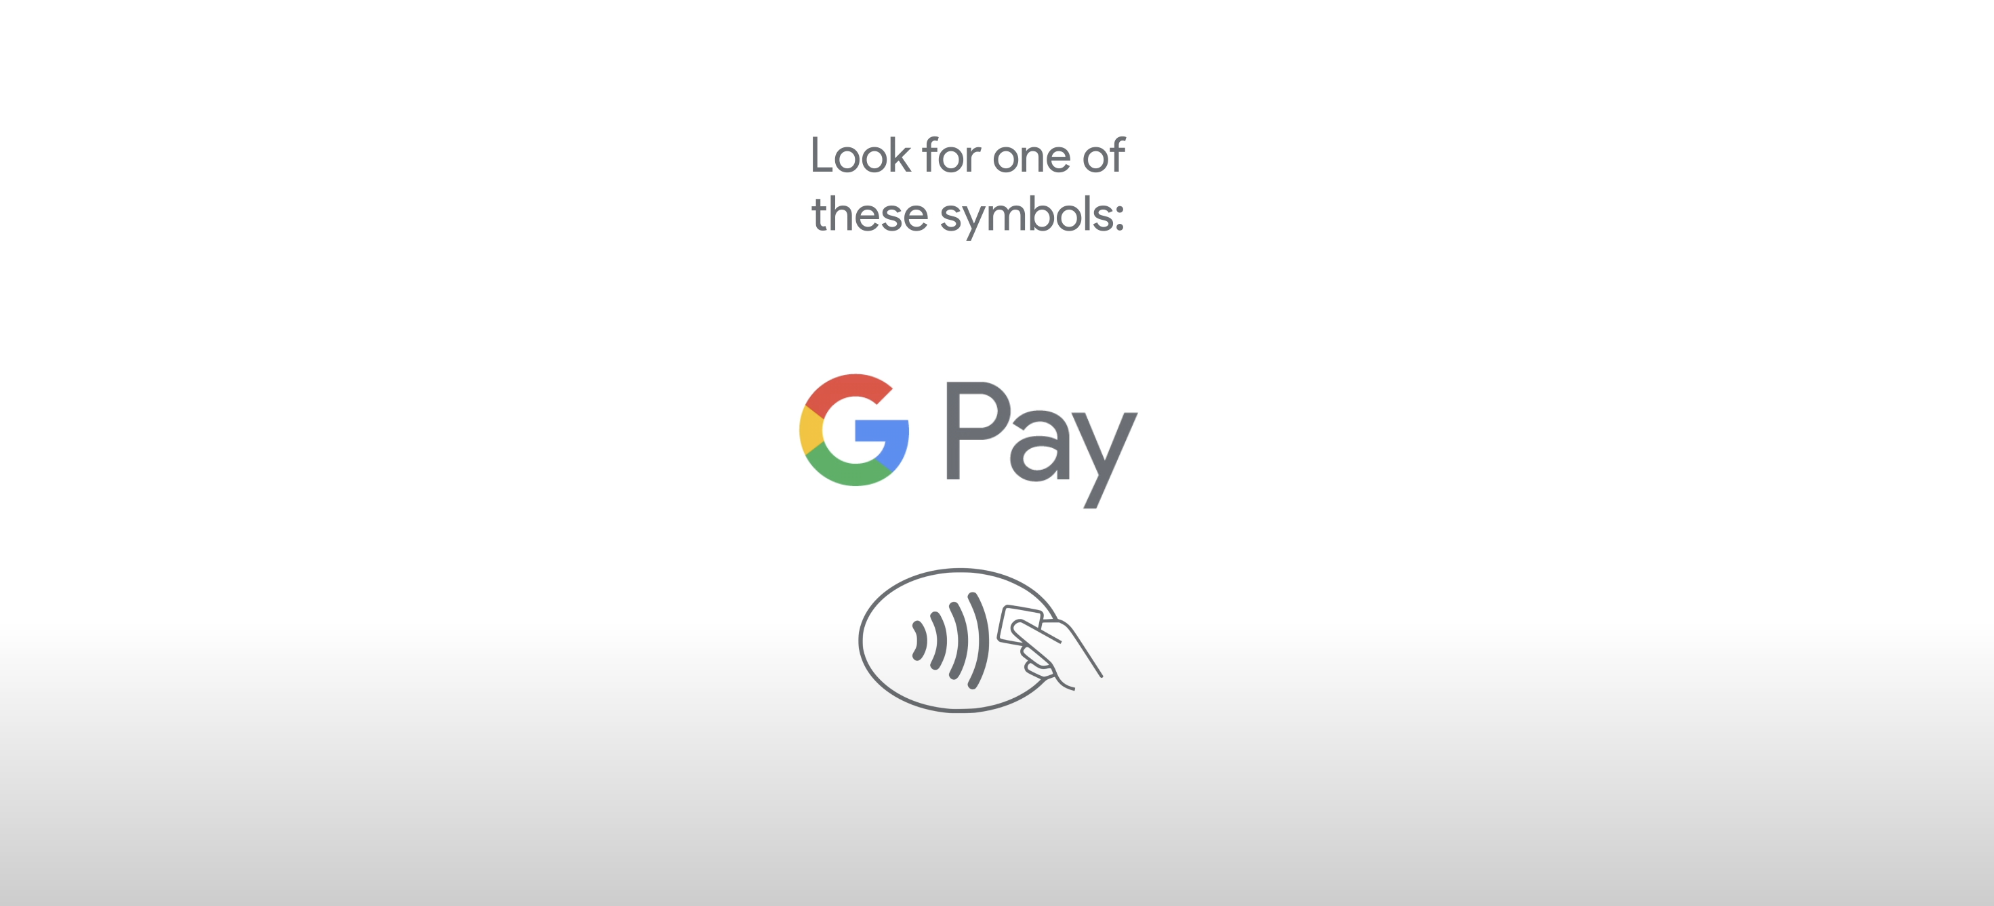 How to pay in stores with Google Pay